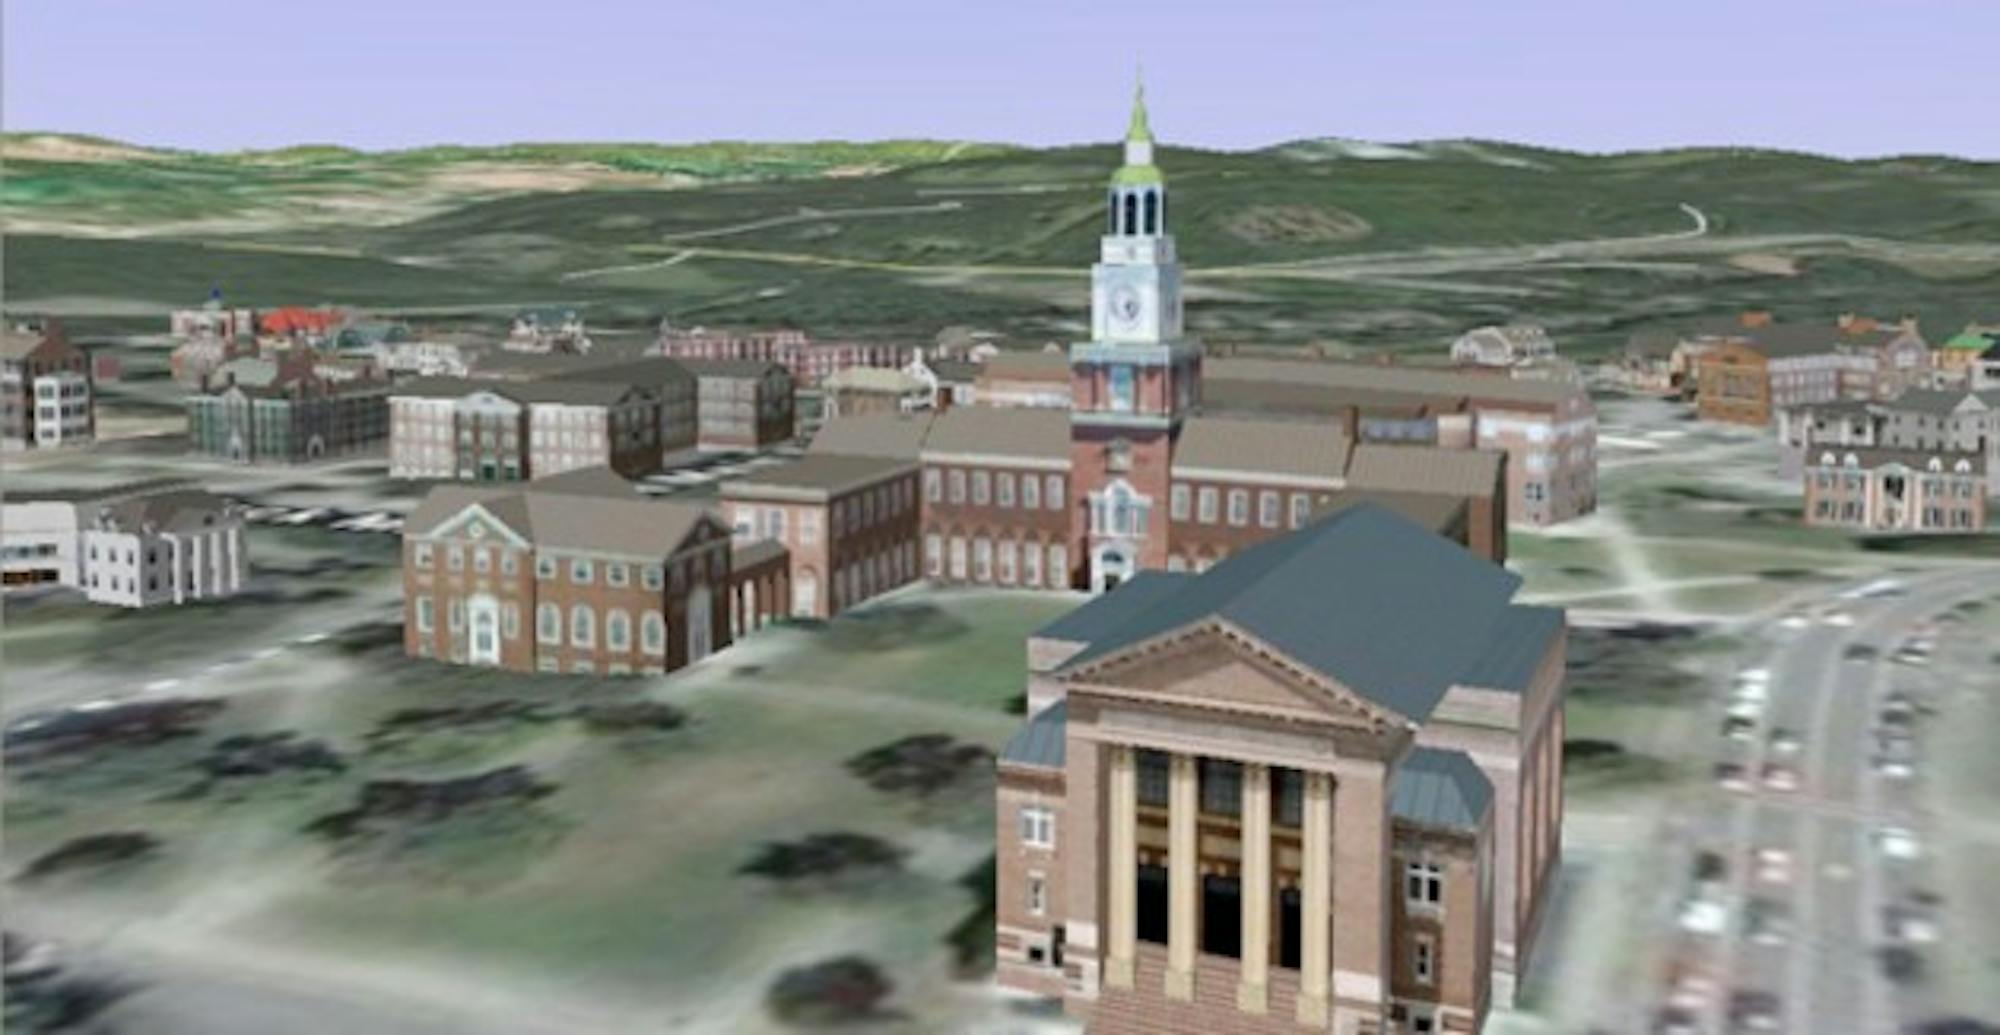 Undergraduates worked on this 3D rendering of the Dartmouth campus throughout the Spring term. As one of seven winning teams they will travel to the Google headquarters in California.